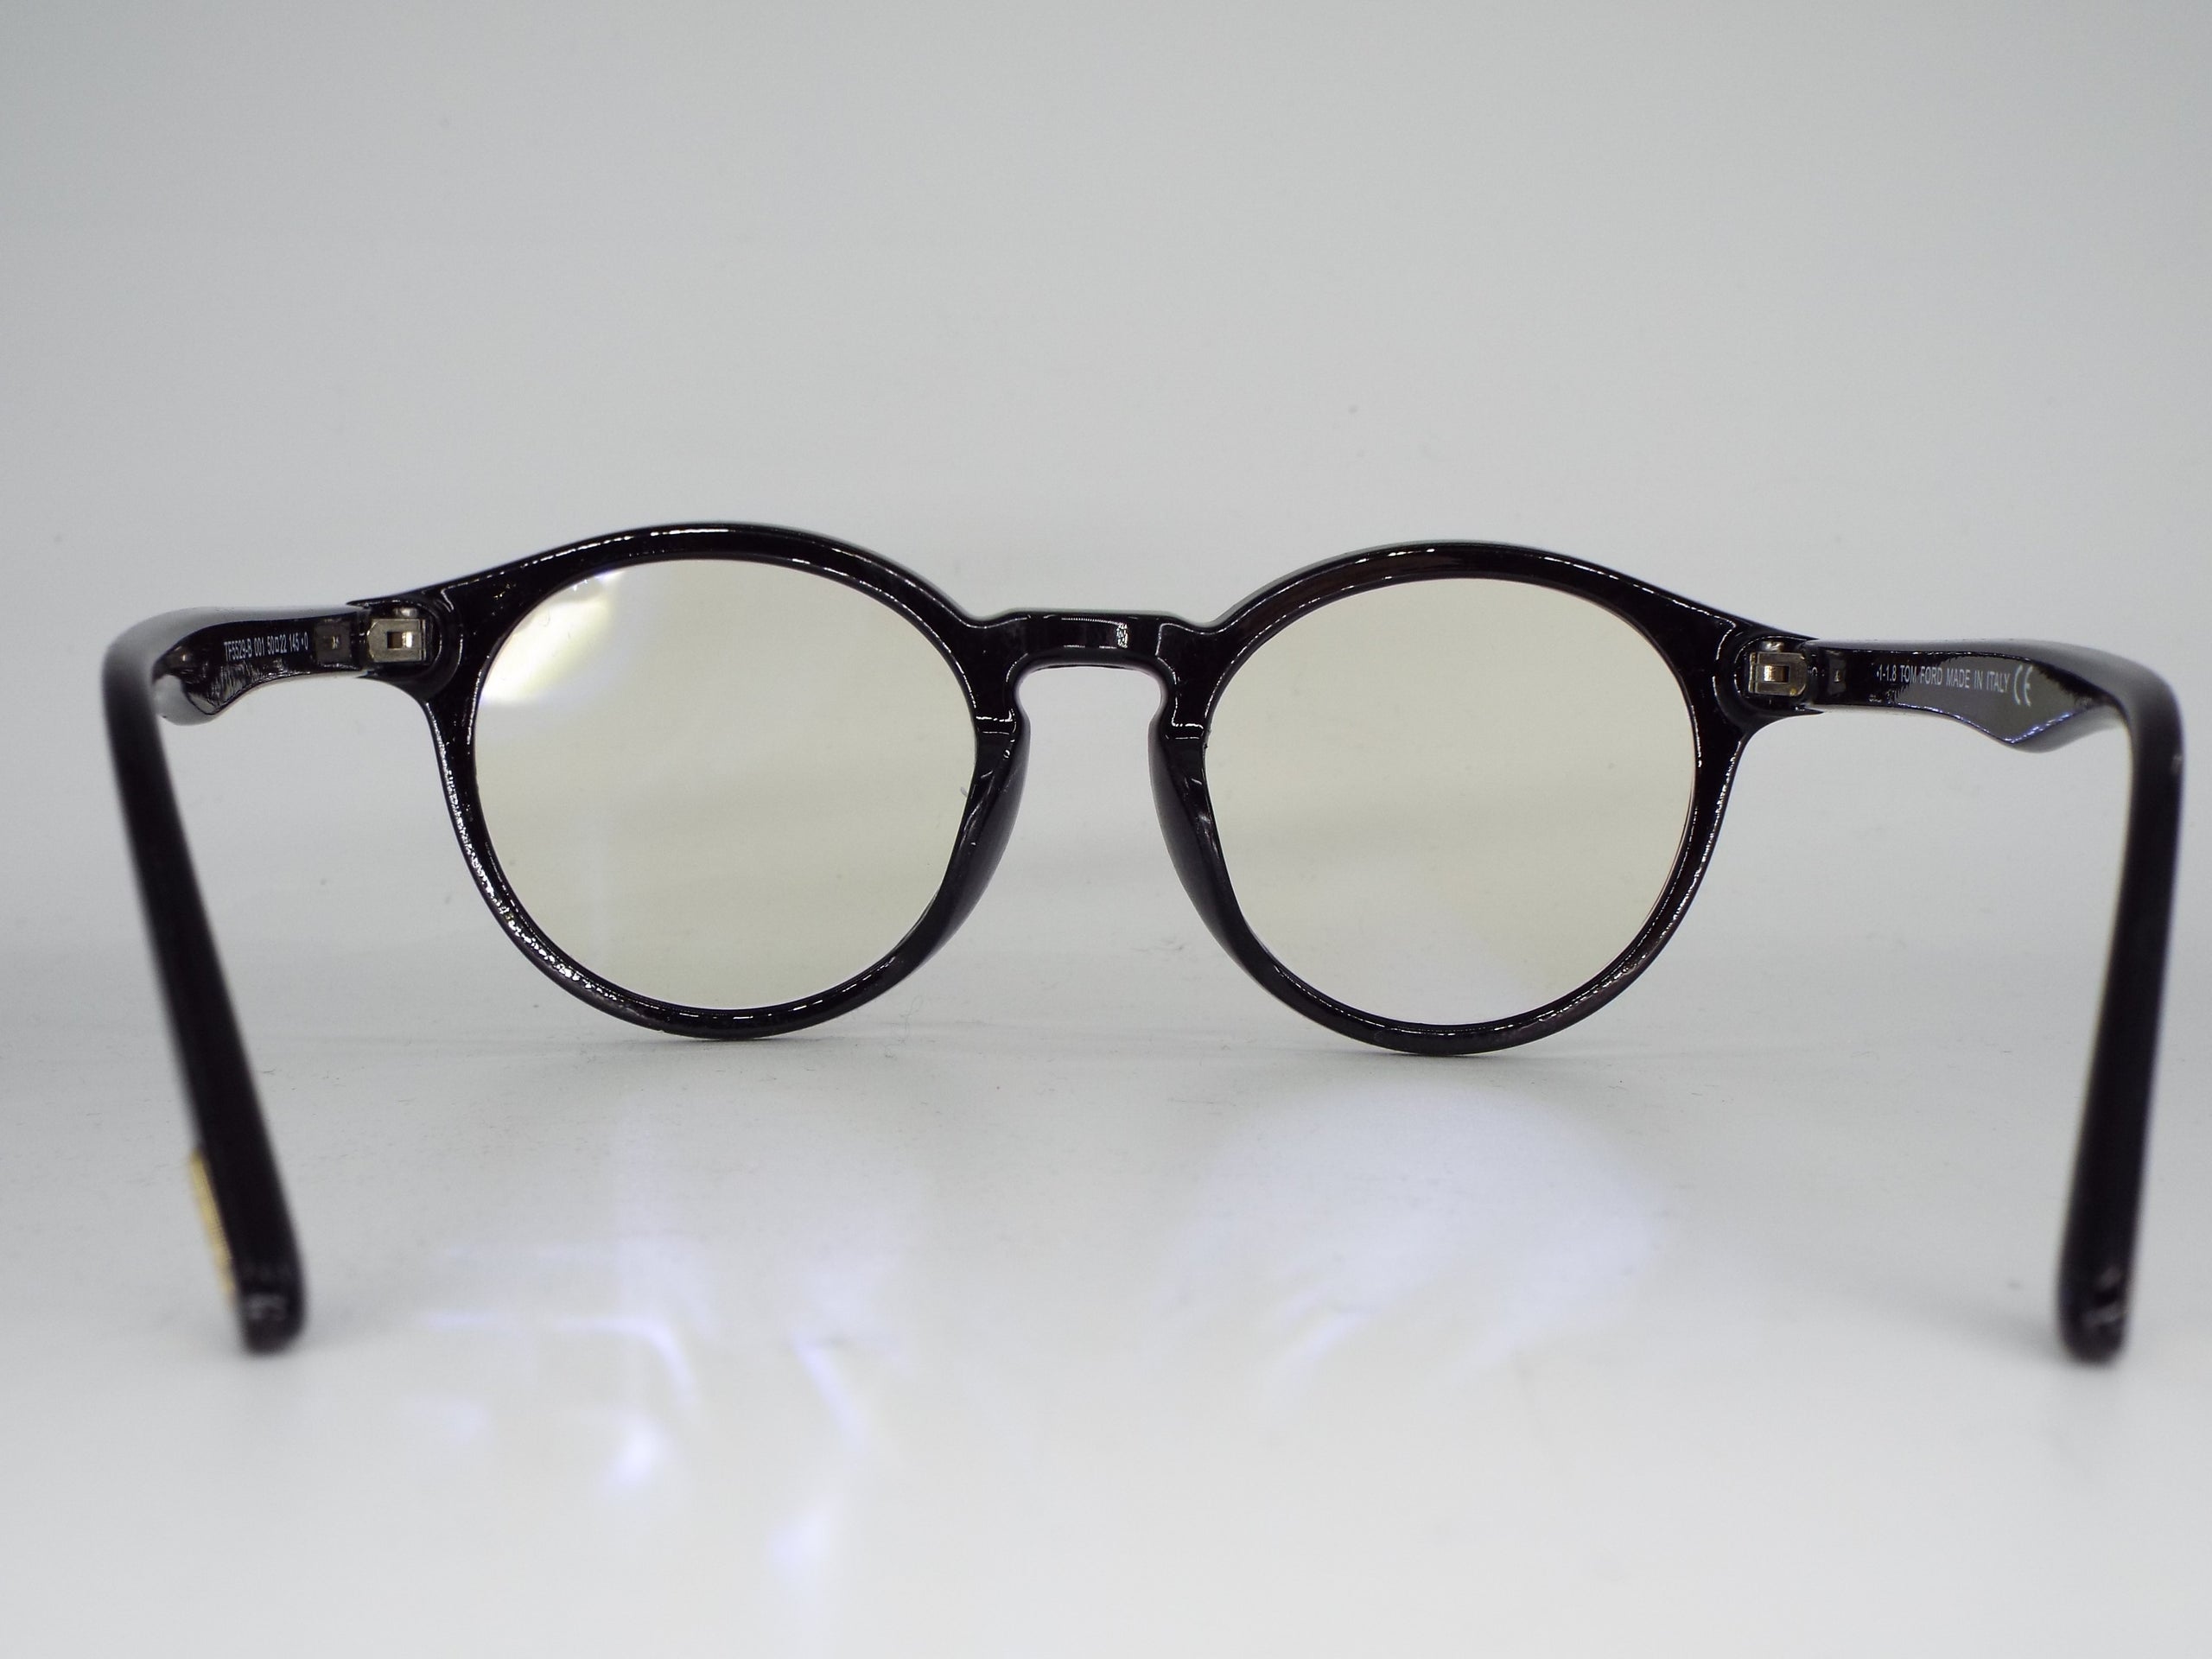 Tom Ford Glasses 1-1.18 | LACASA Collection Online